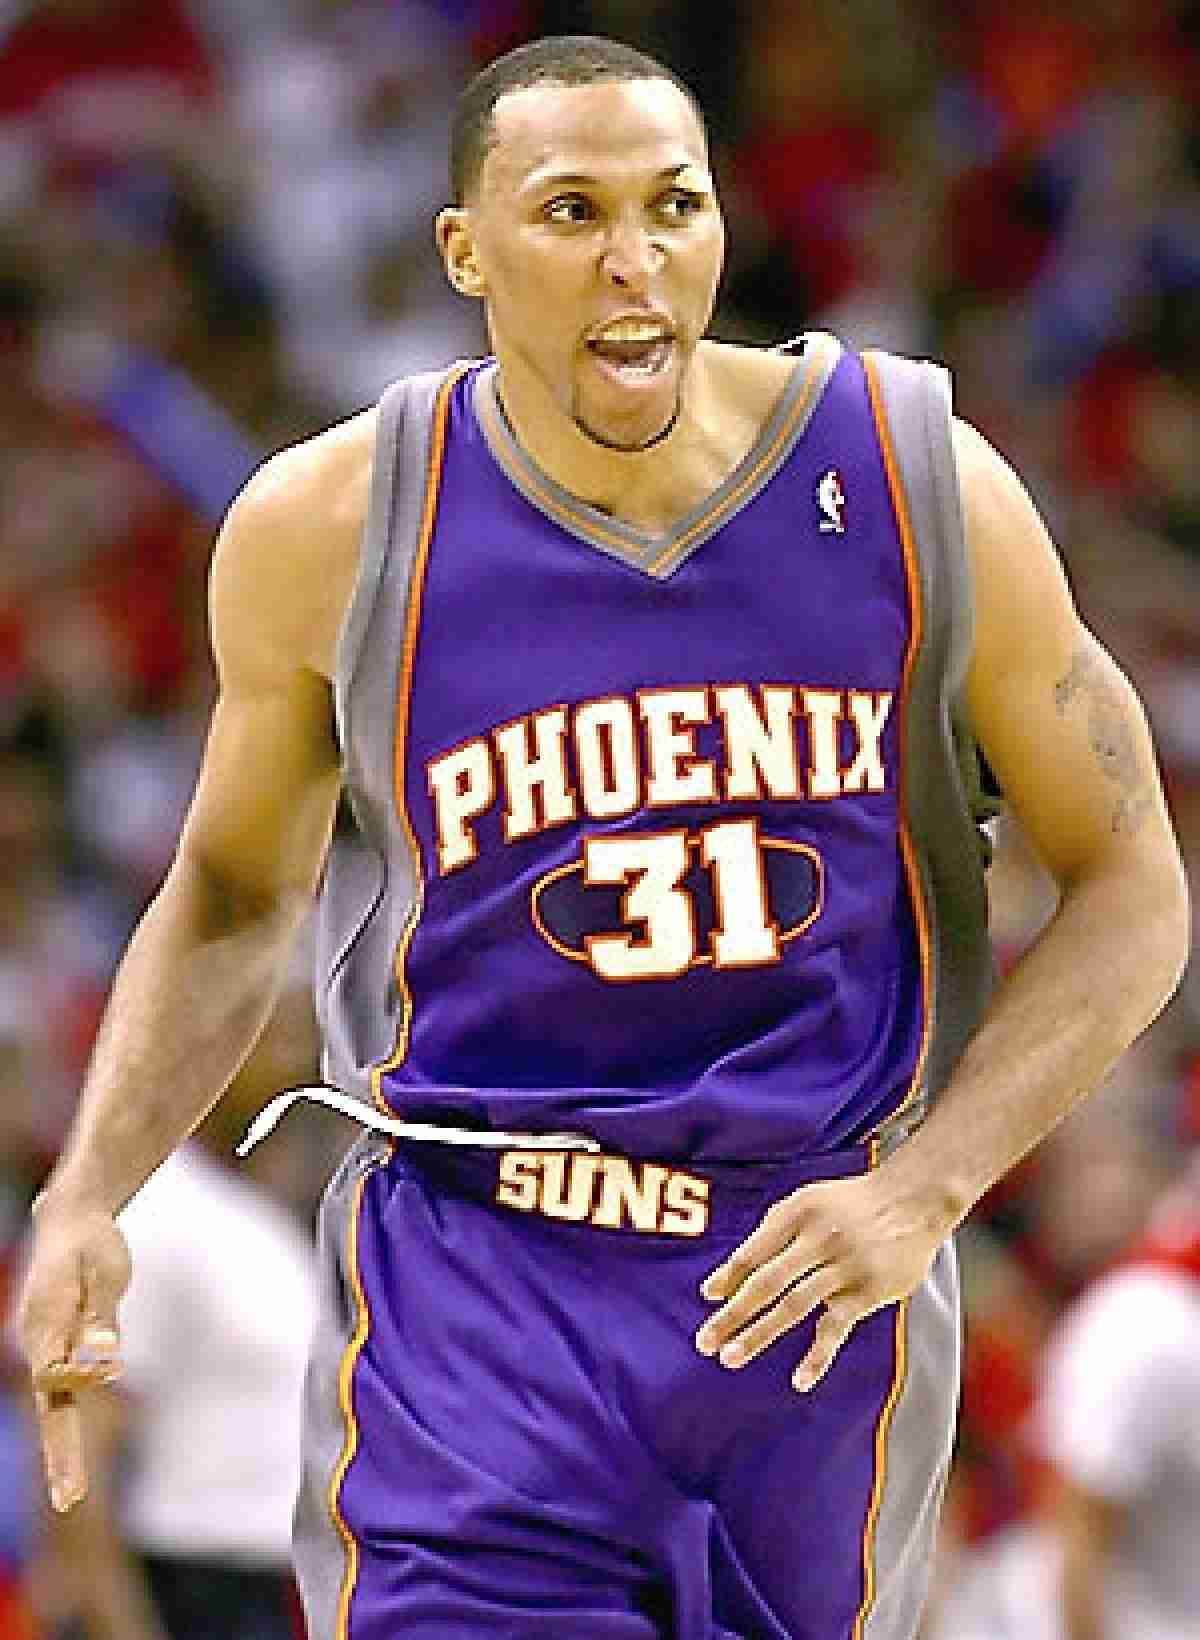 Not in Hall of Fame - 18. Shawn Marion